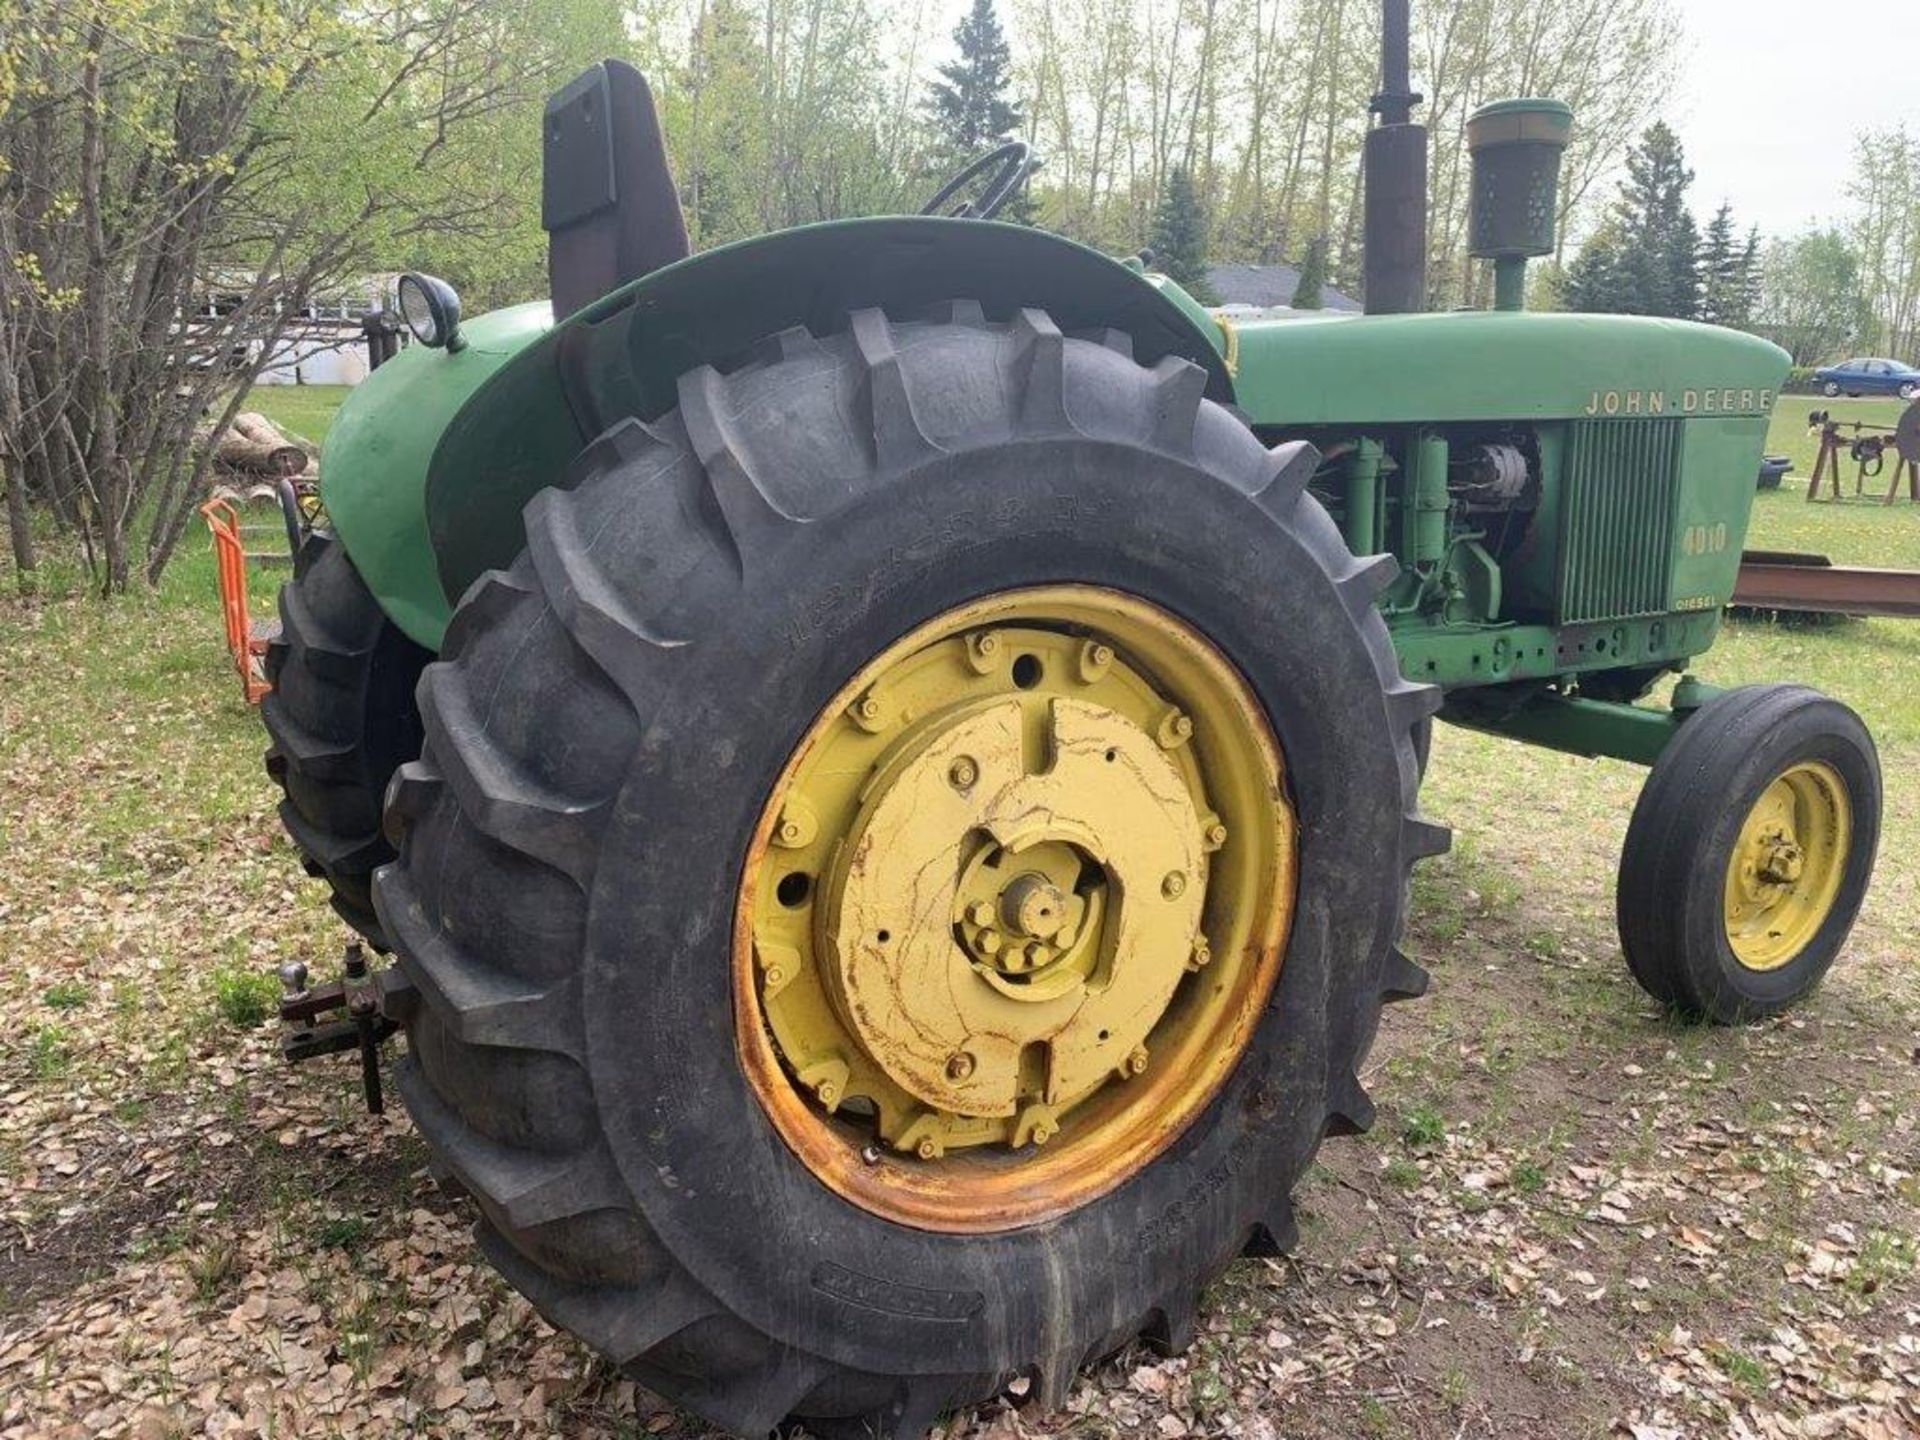 JOHN DEERE 4010 TRACTOR, DIESEL, 2WD, 18.4-34 R1 RUBBER (GOOD CONDITION), 540 PTO, S/N 401022T3600 - Image 7 of 14